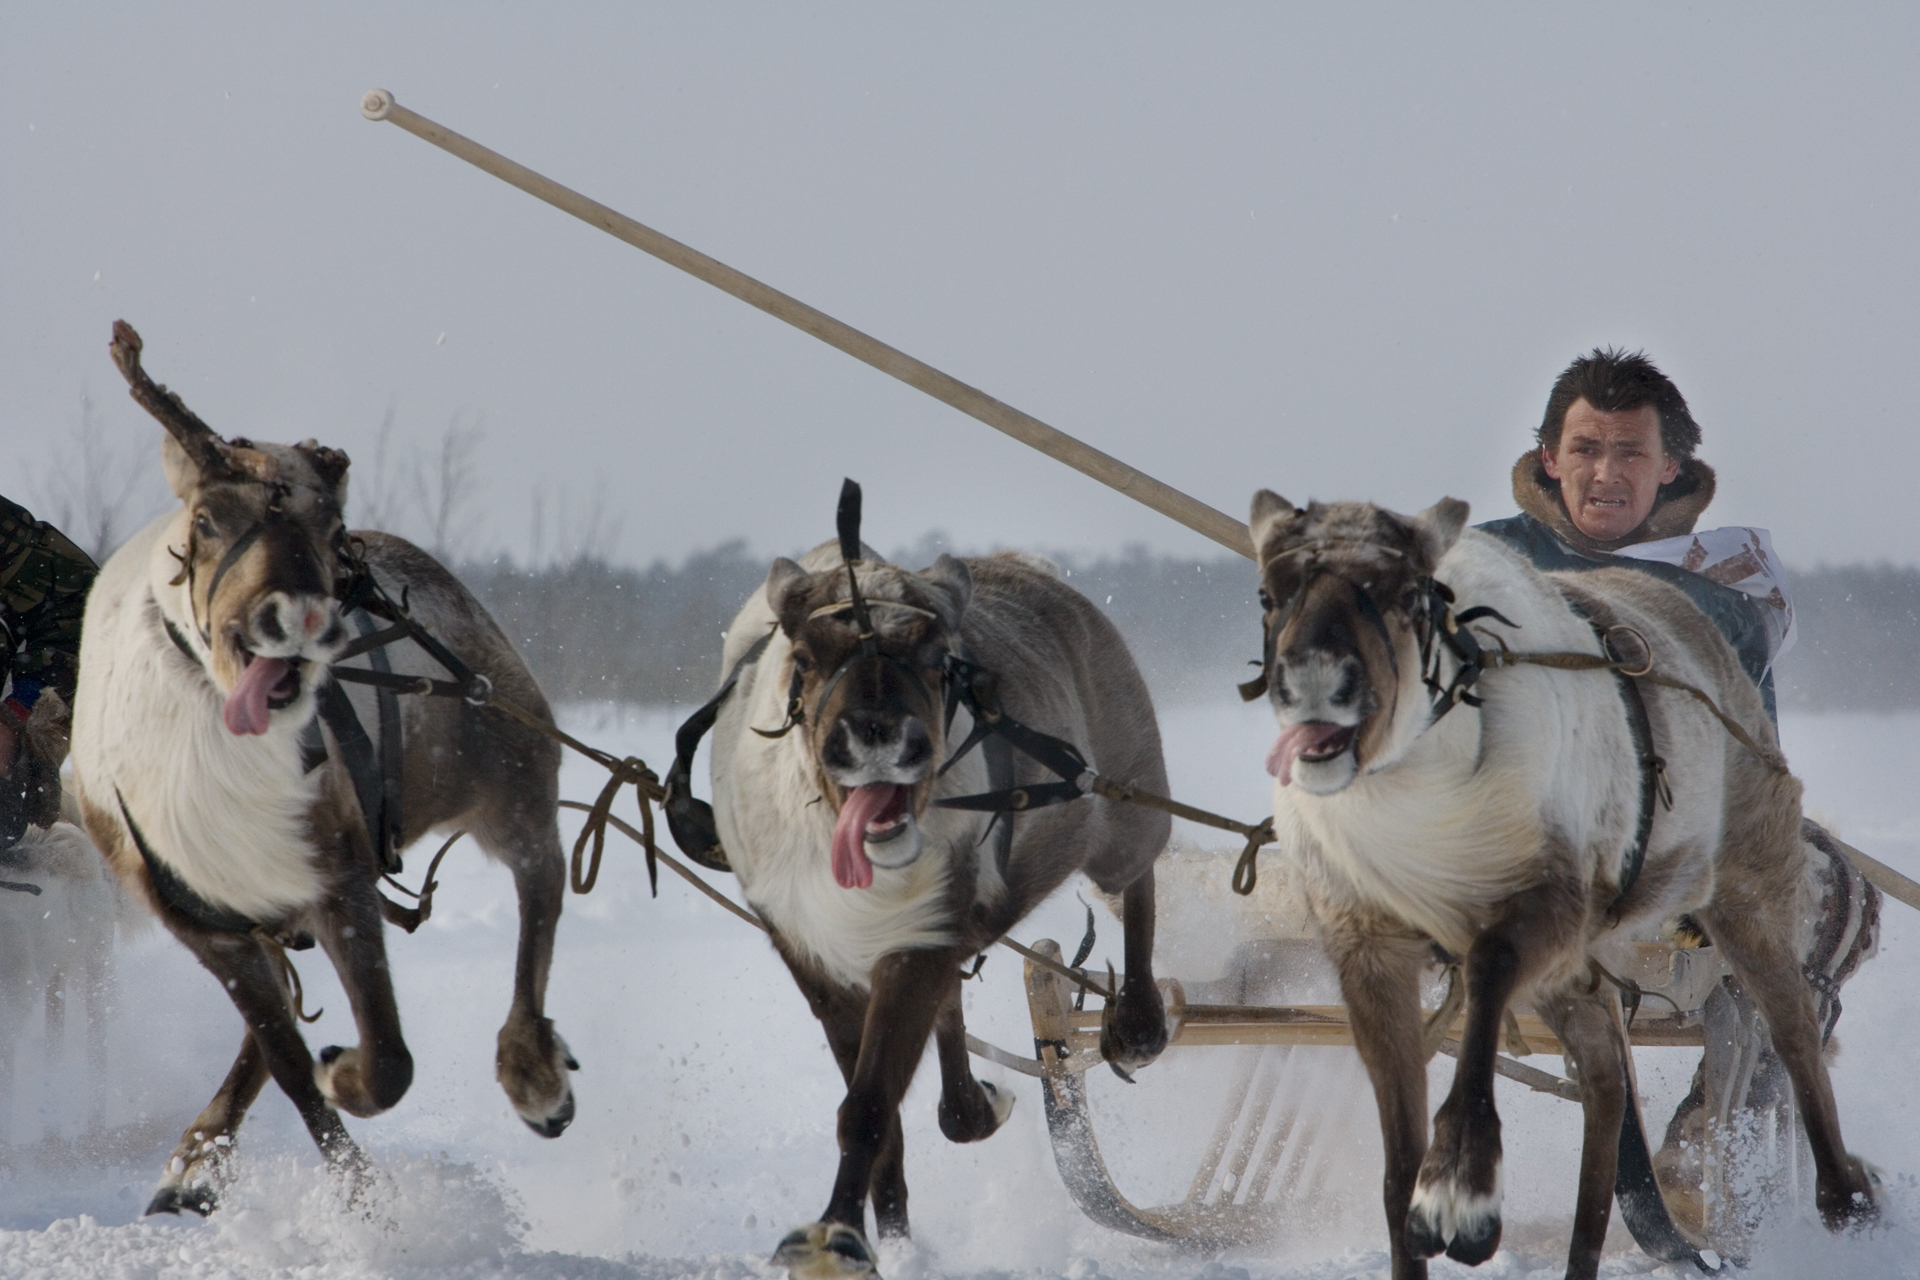  Reindeer sled racing is a key event of “Fishing and Hunting Day”, celebrated annually throughout the Khanty-Mansiysk region.  Russkinskaya, Russia  